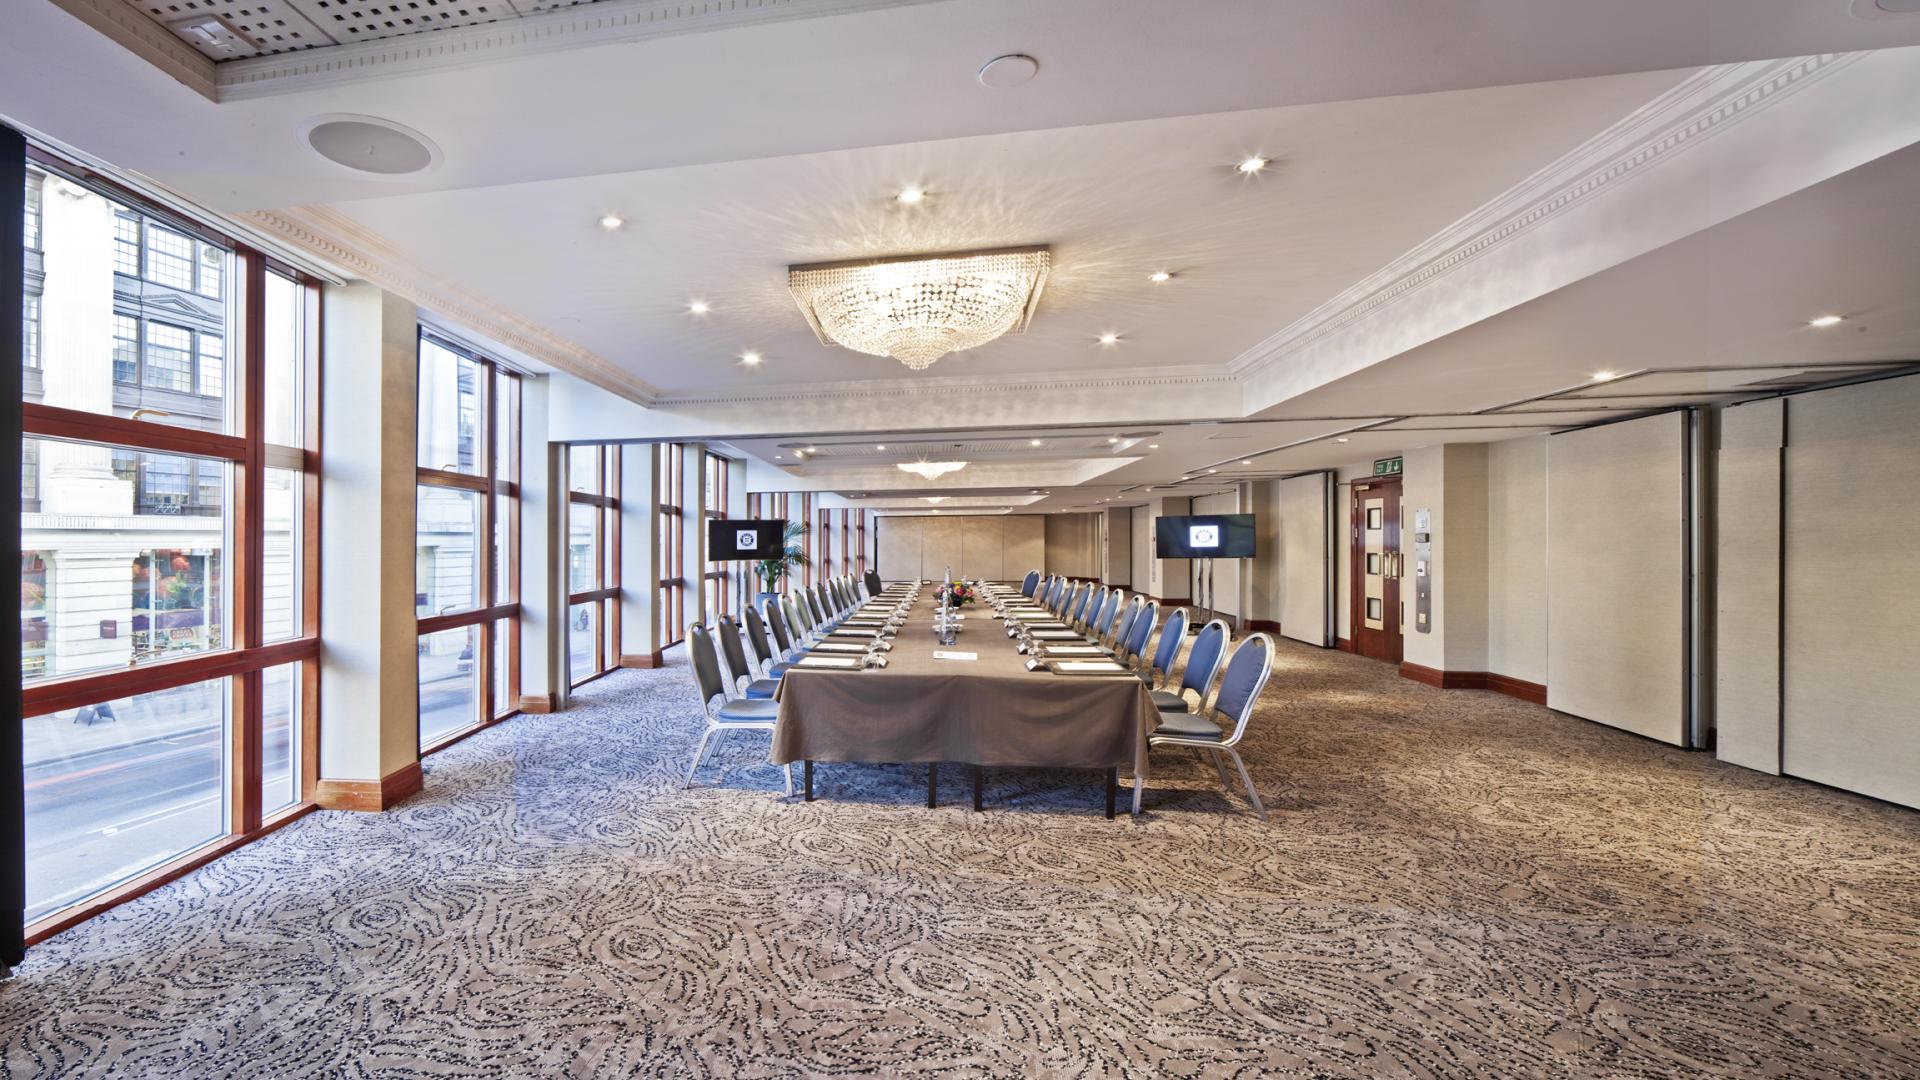 Conference Venues for Hire in Bloomsbury